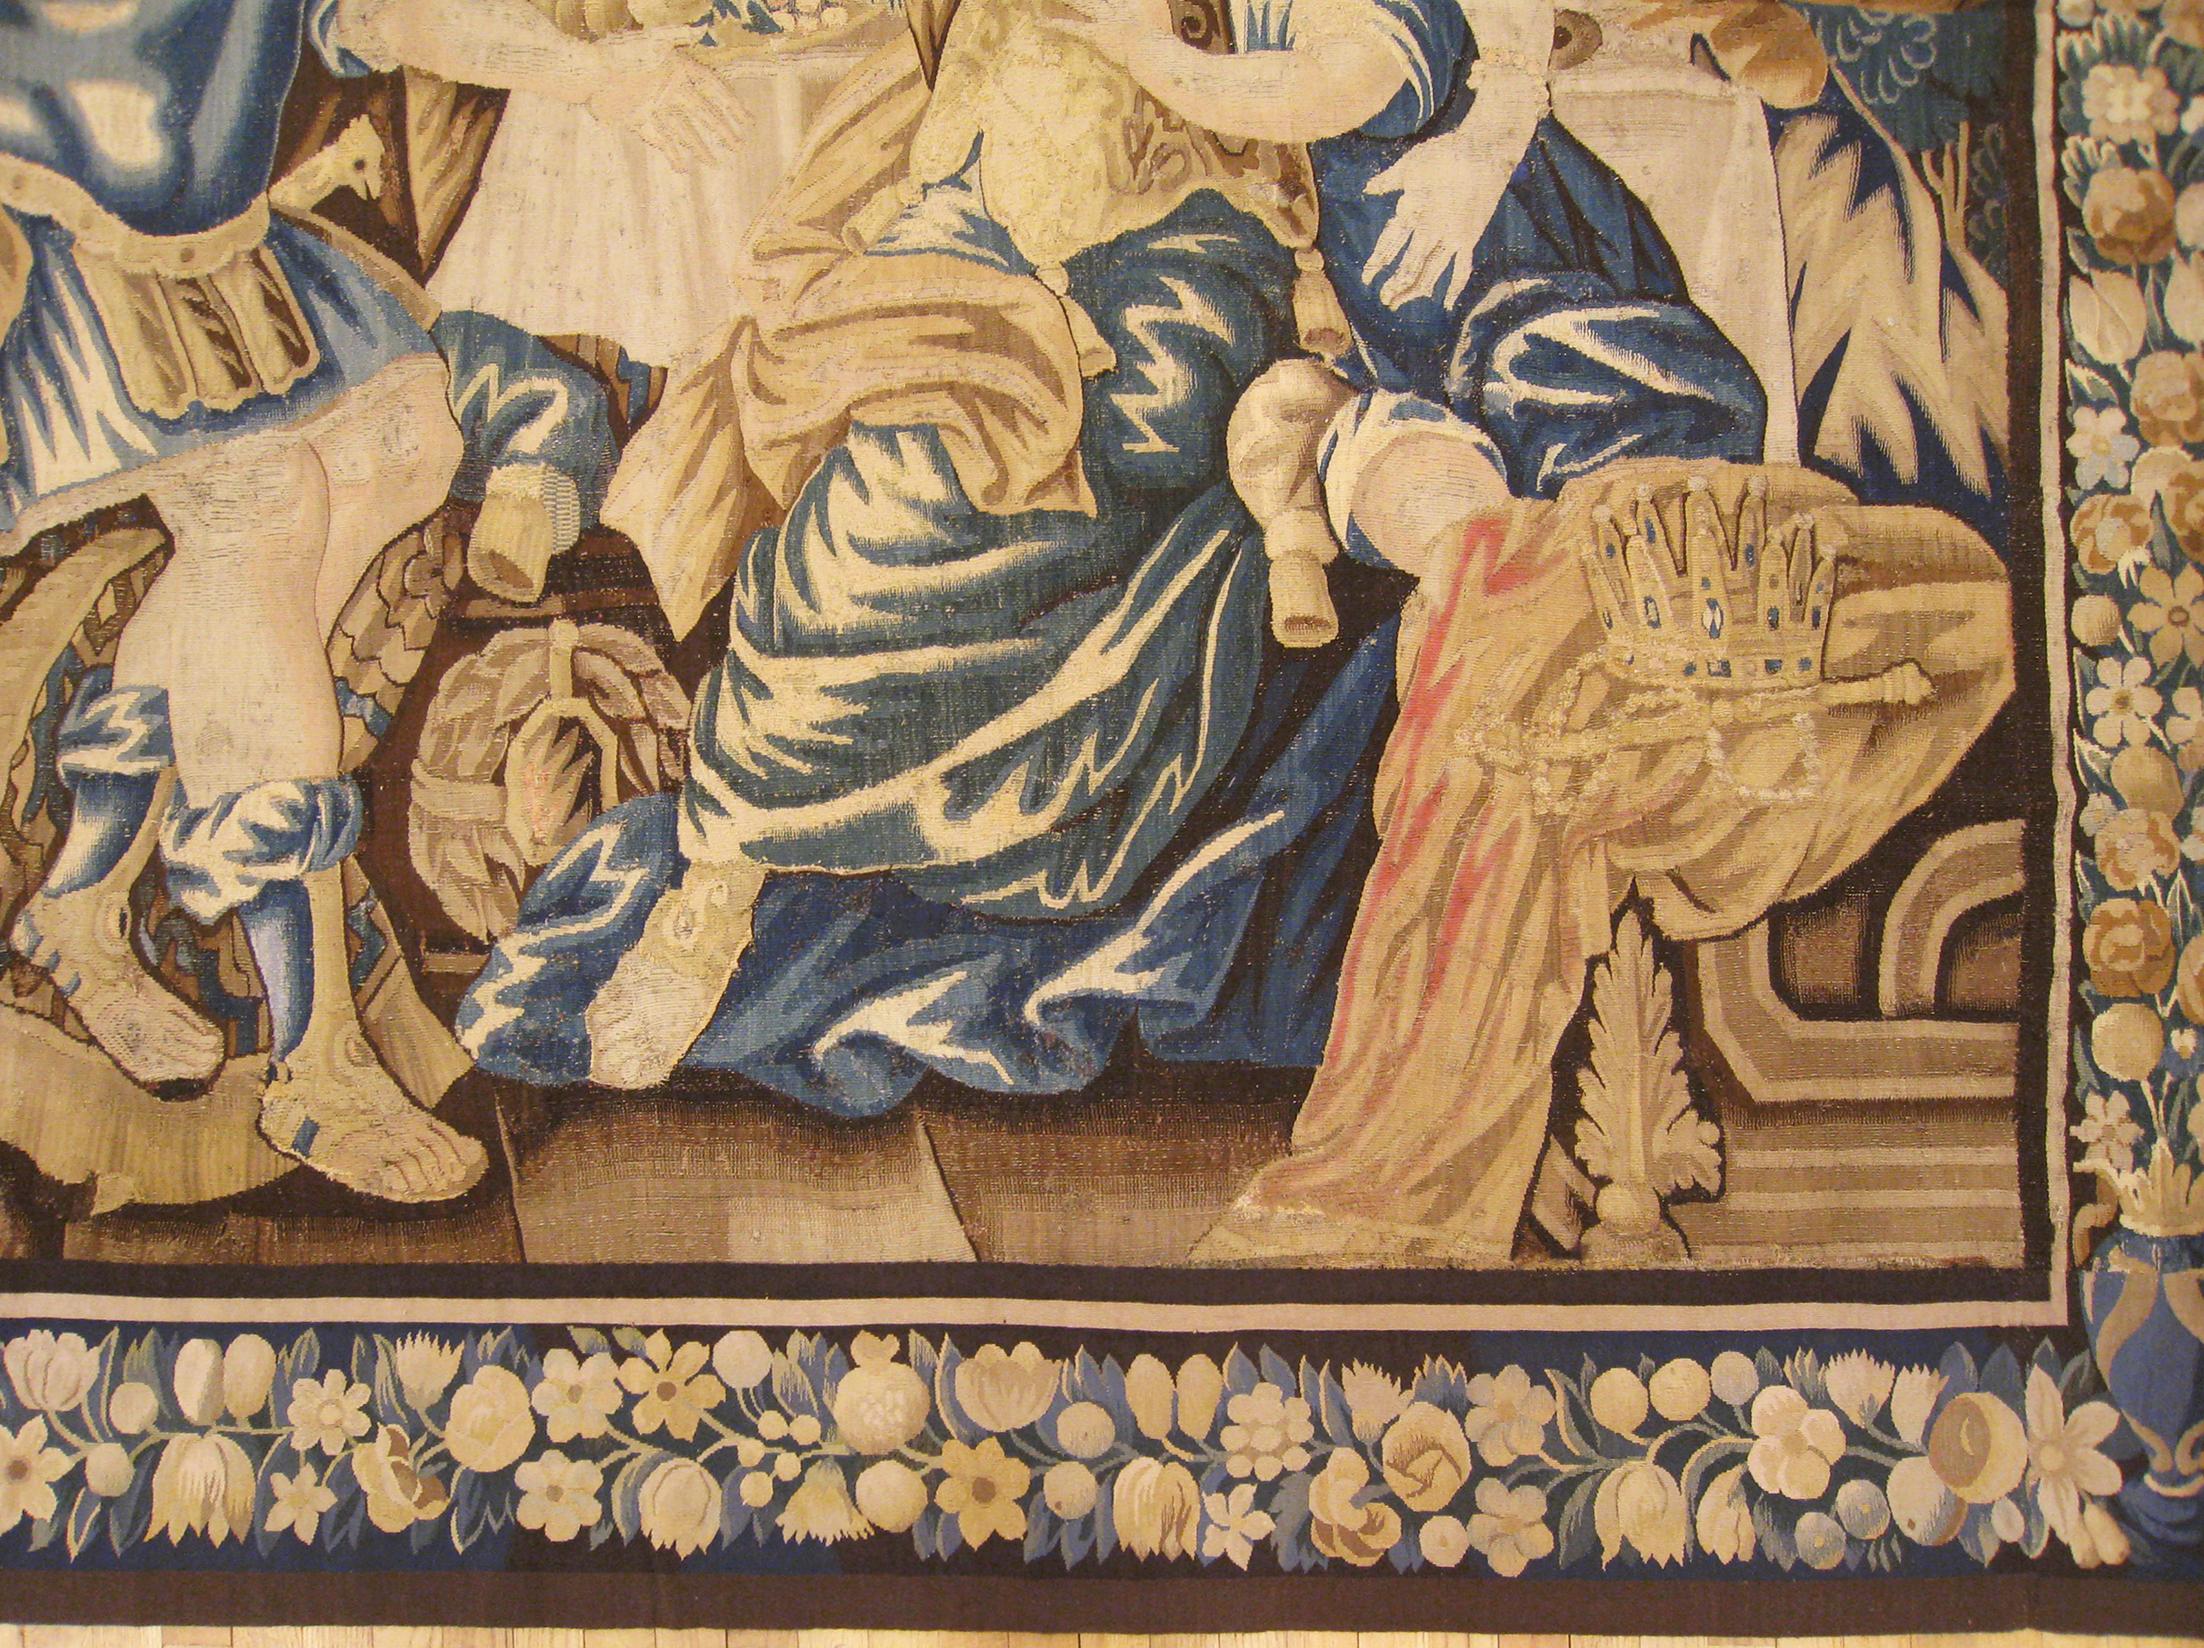 Hand-Woven Antique 17th Century Flemish Historical Tapestry, Featuring Dido and Aeneas For Sale